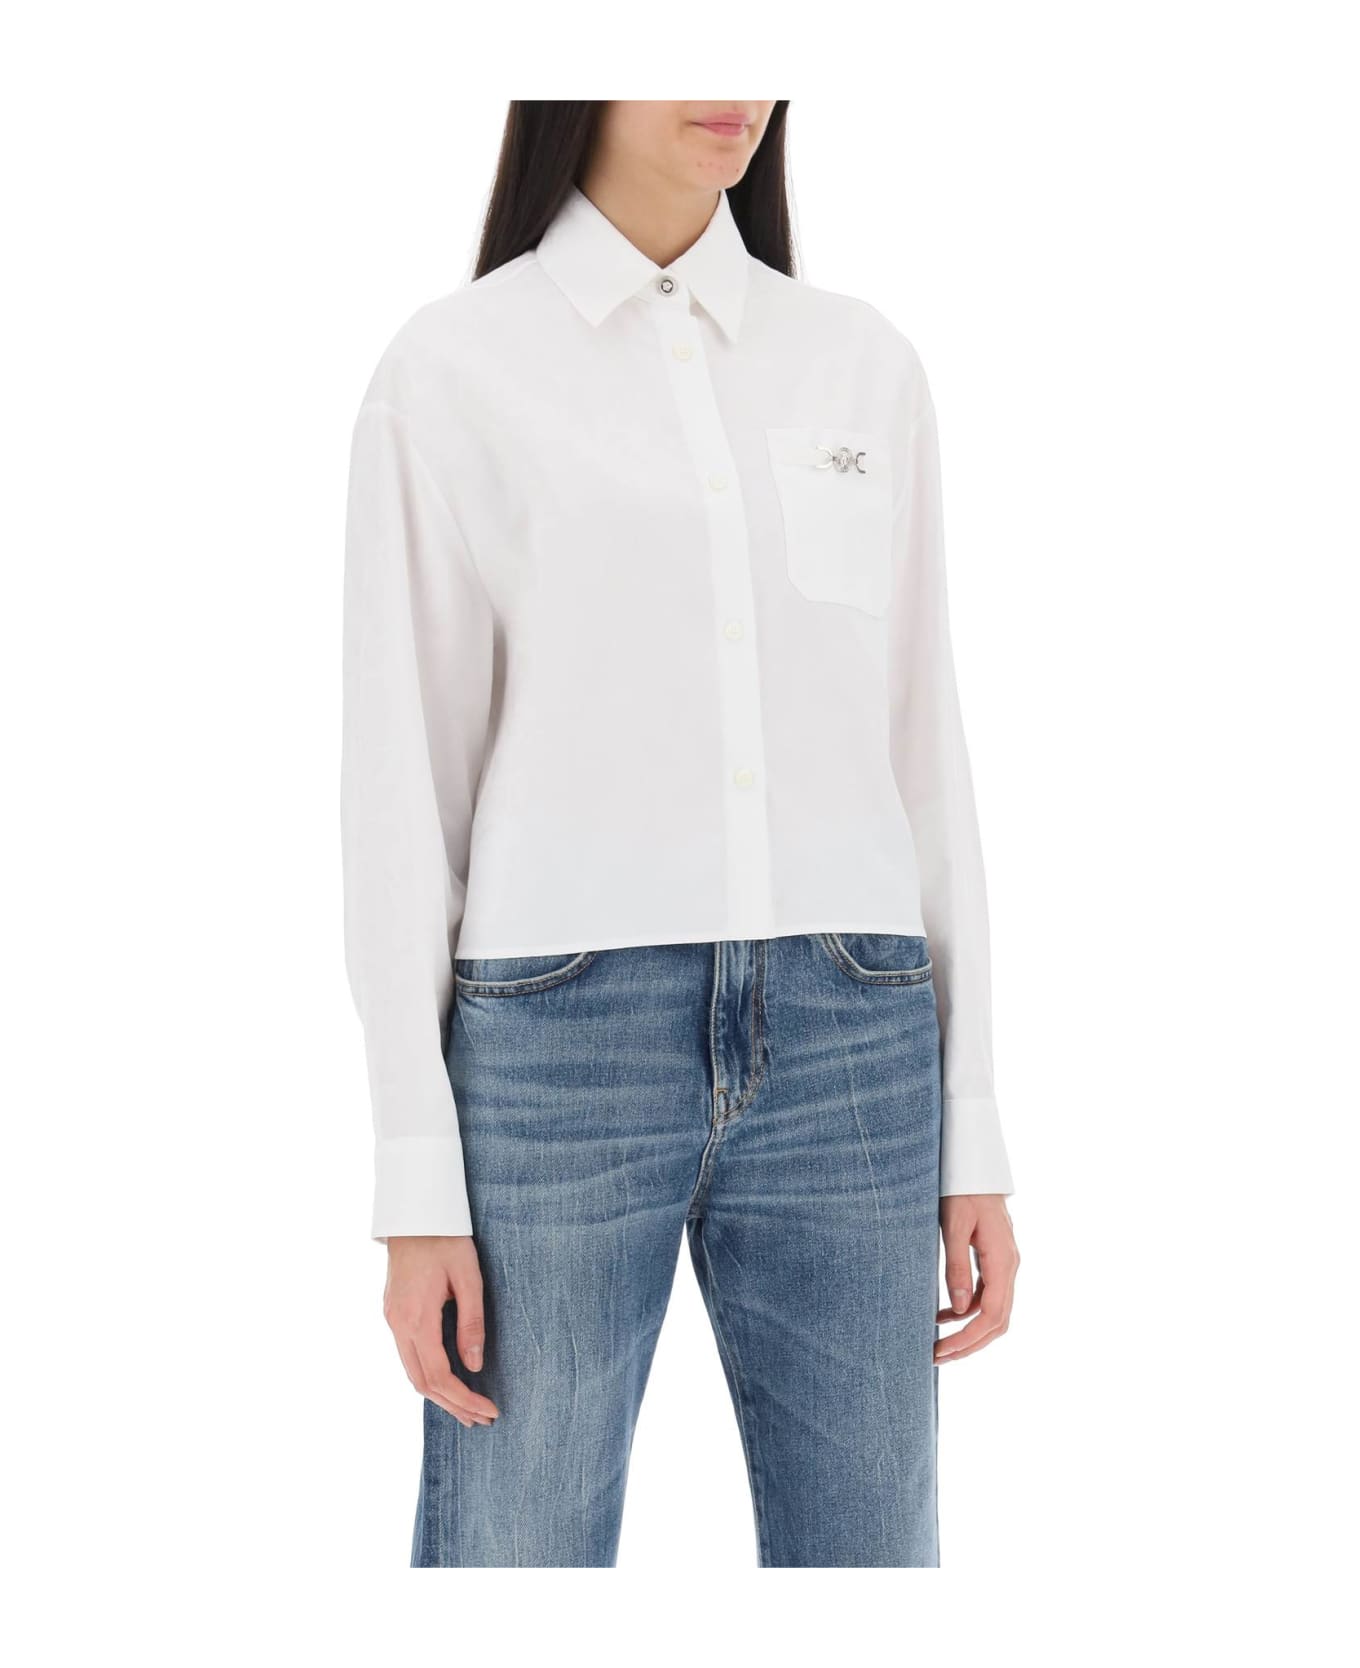 Versace Barocco Cropped Shirt - OPTICAL WHITE (White) シャツ